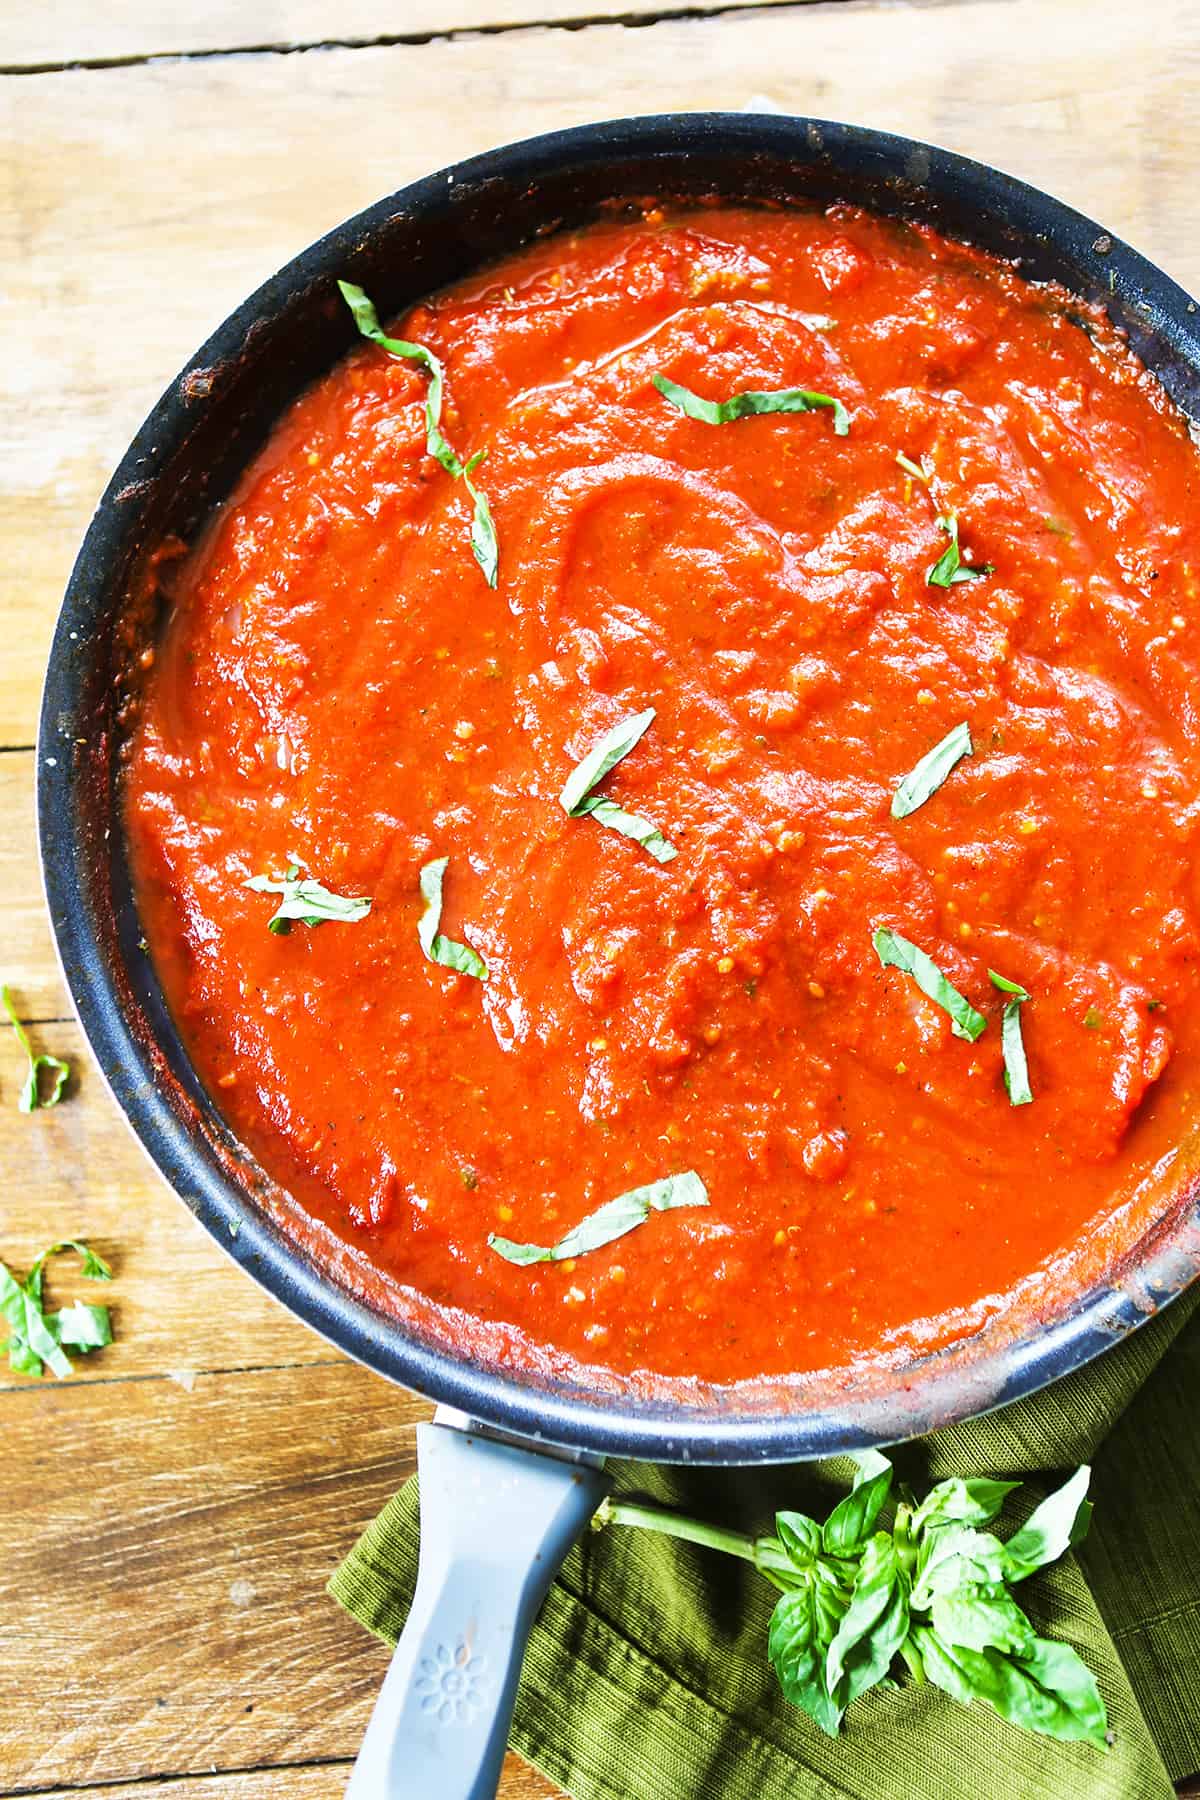 Skillet filled with marinara sauce and topped with pieces of fresh basil.